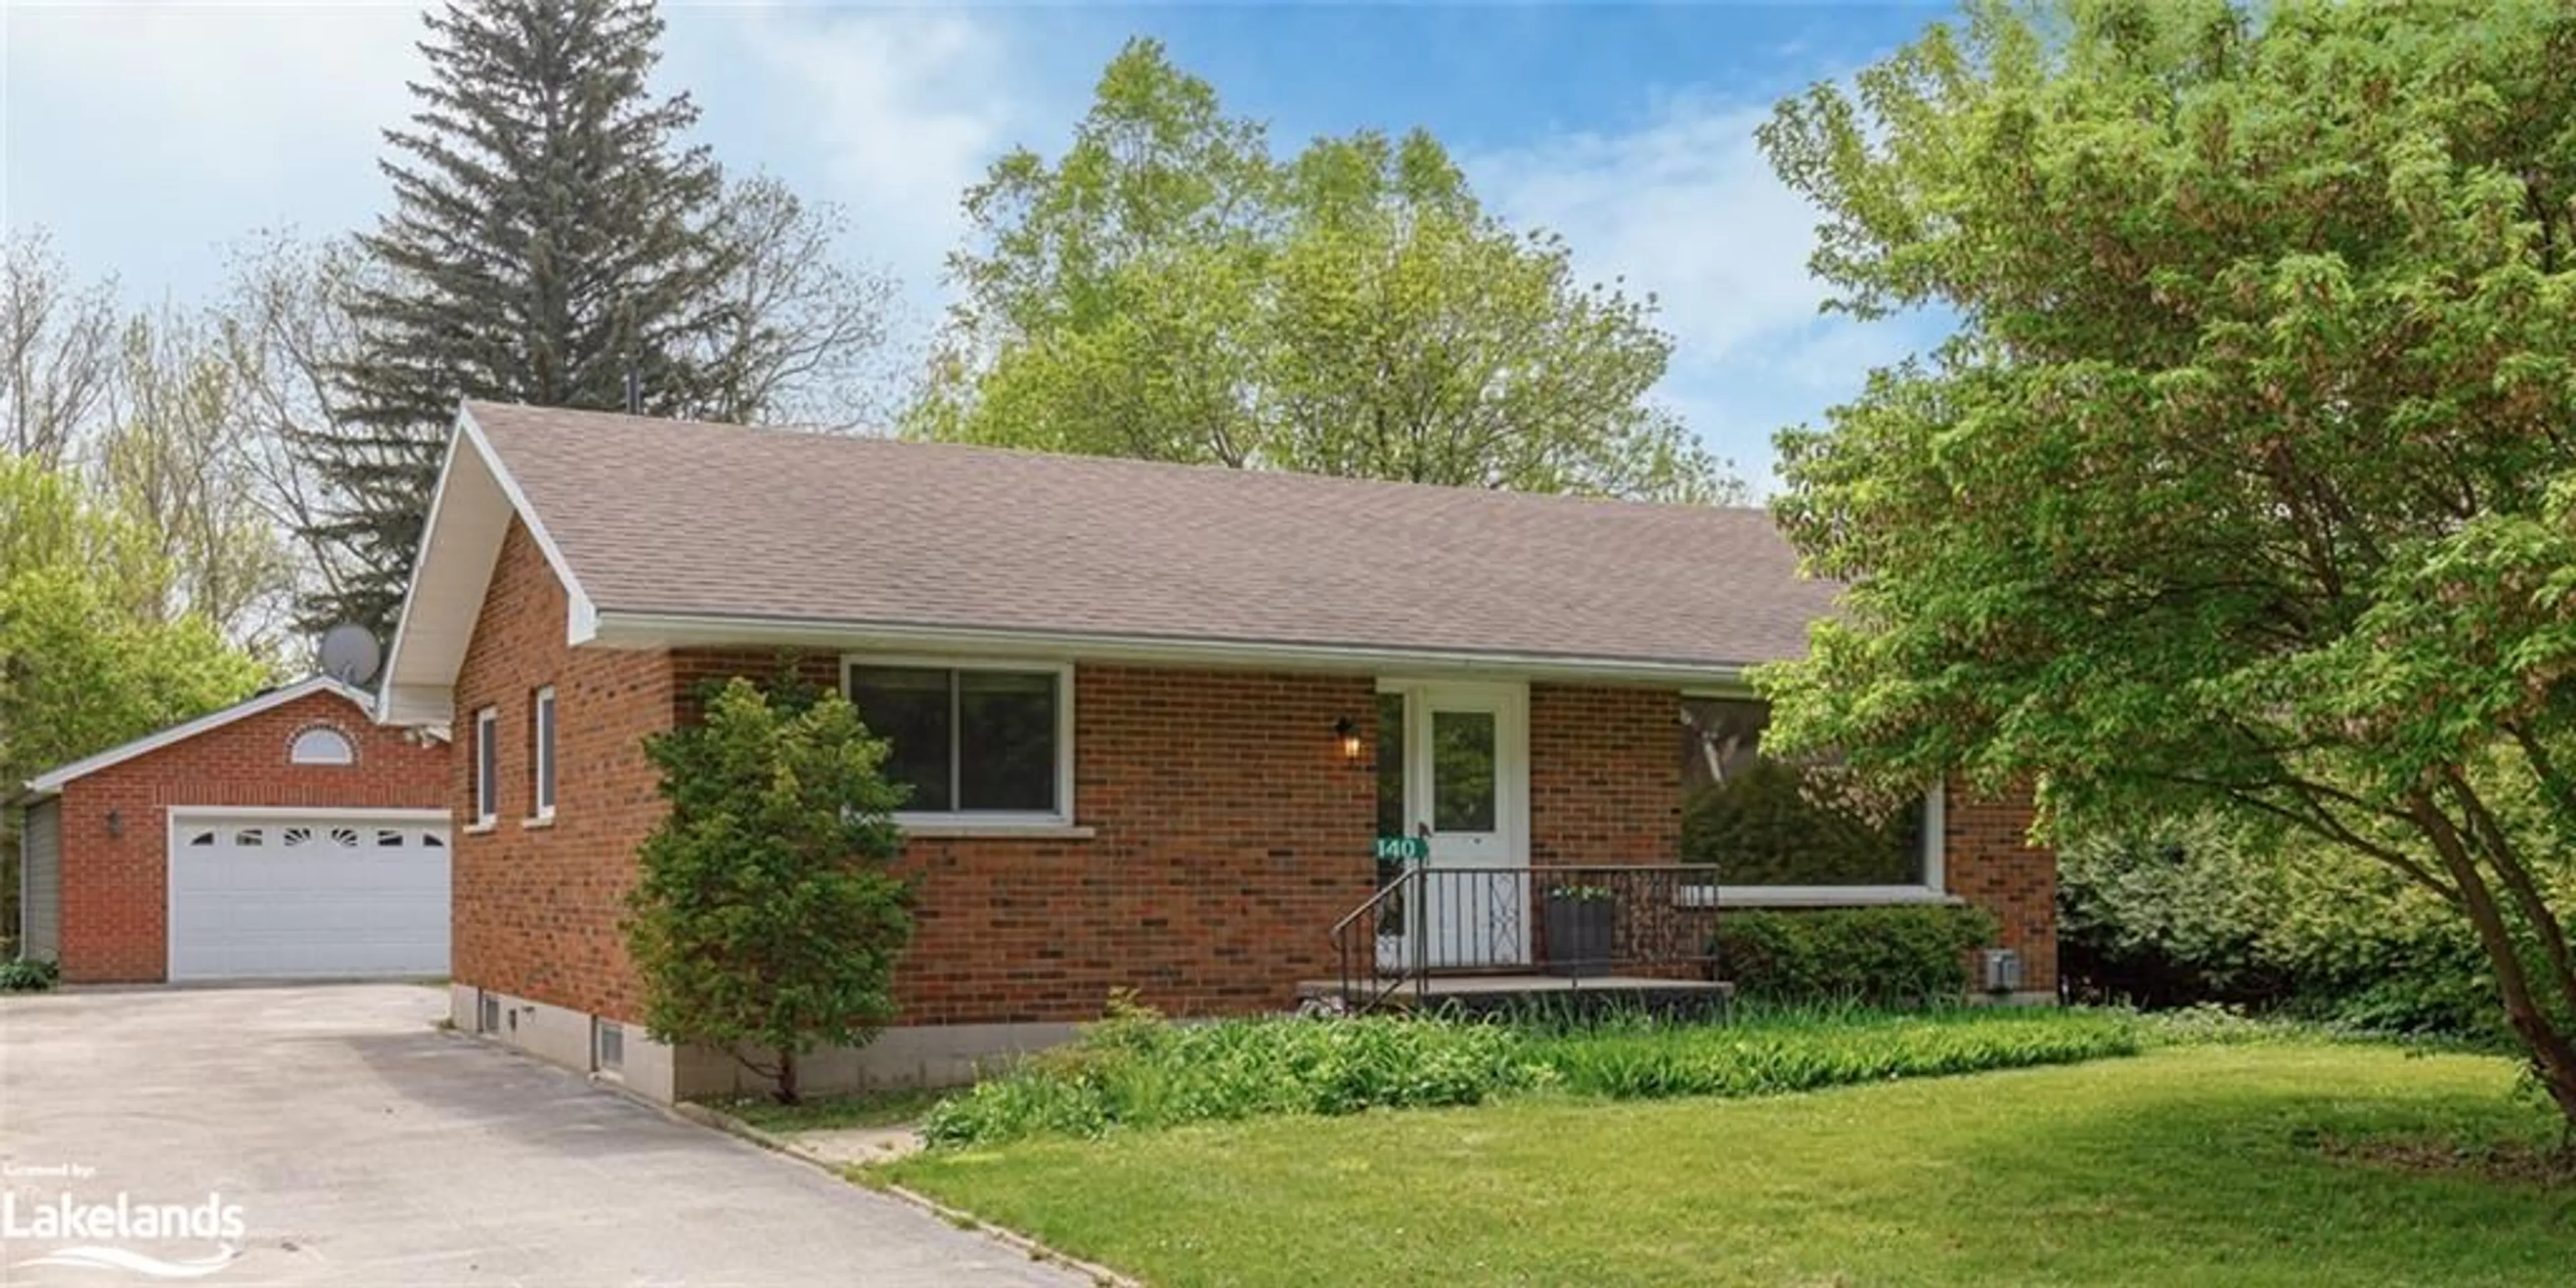 Home with brick exterior material for 140 Russell St, Clarksburg Ontario N0H 1J0